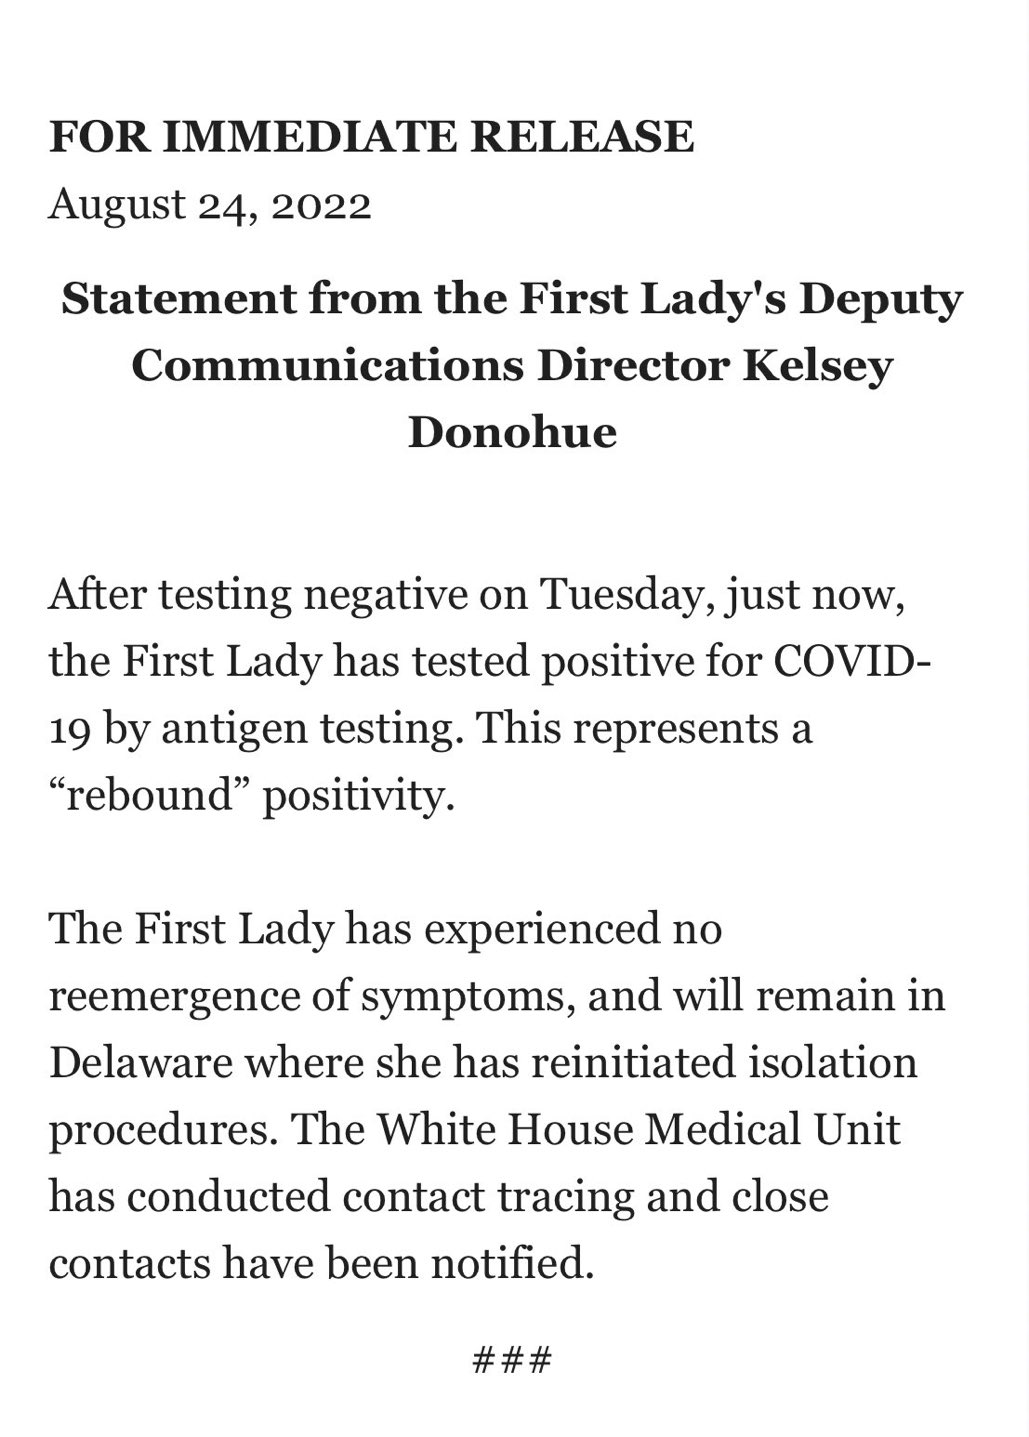 (Statement released by Kelsey Donohue, the deputy communications director for the first lady)